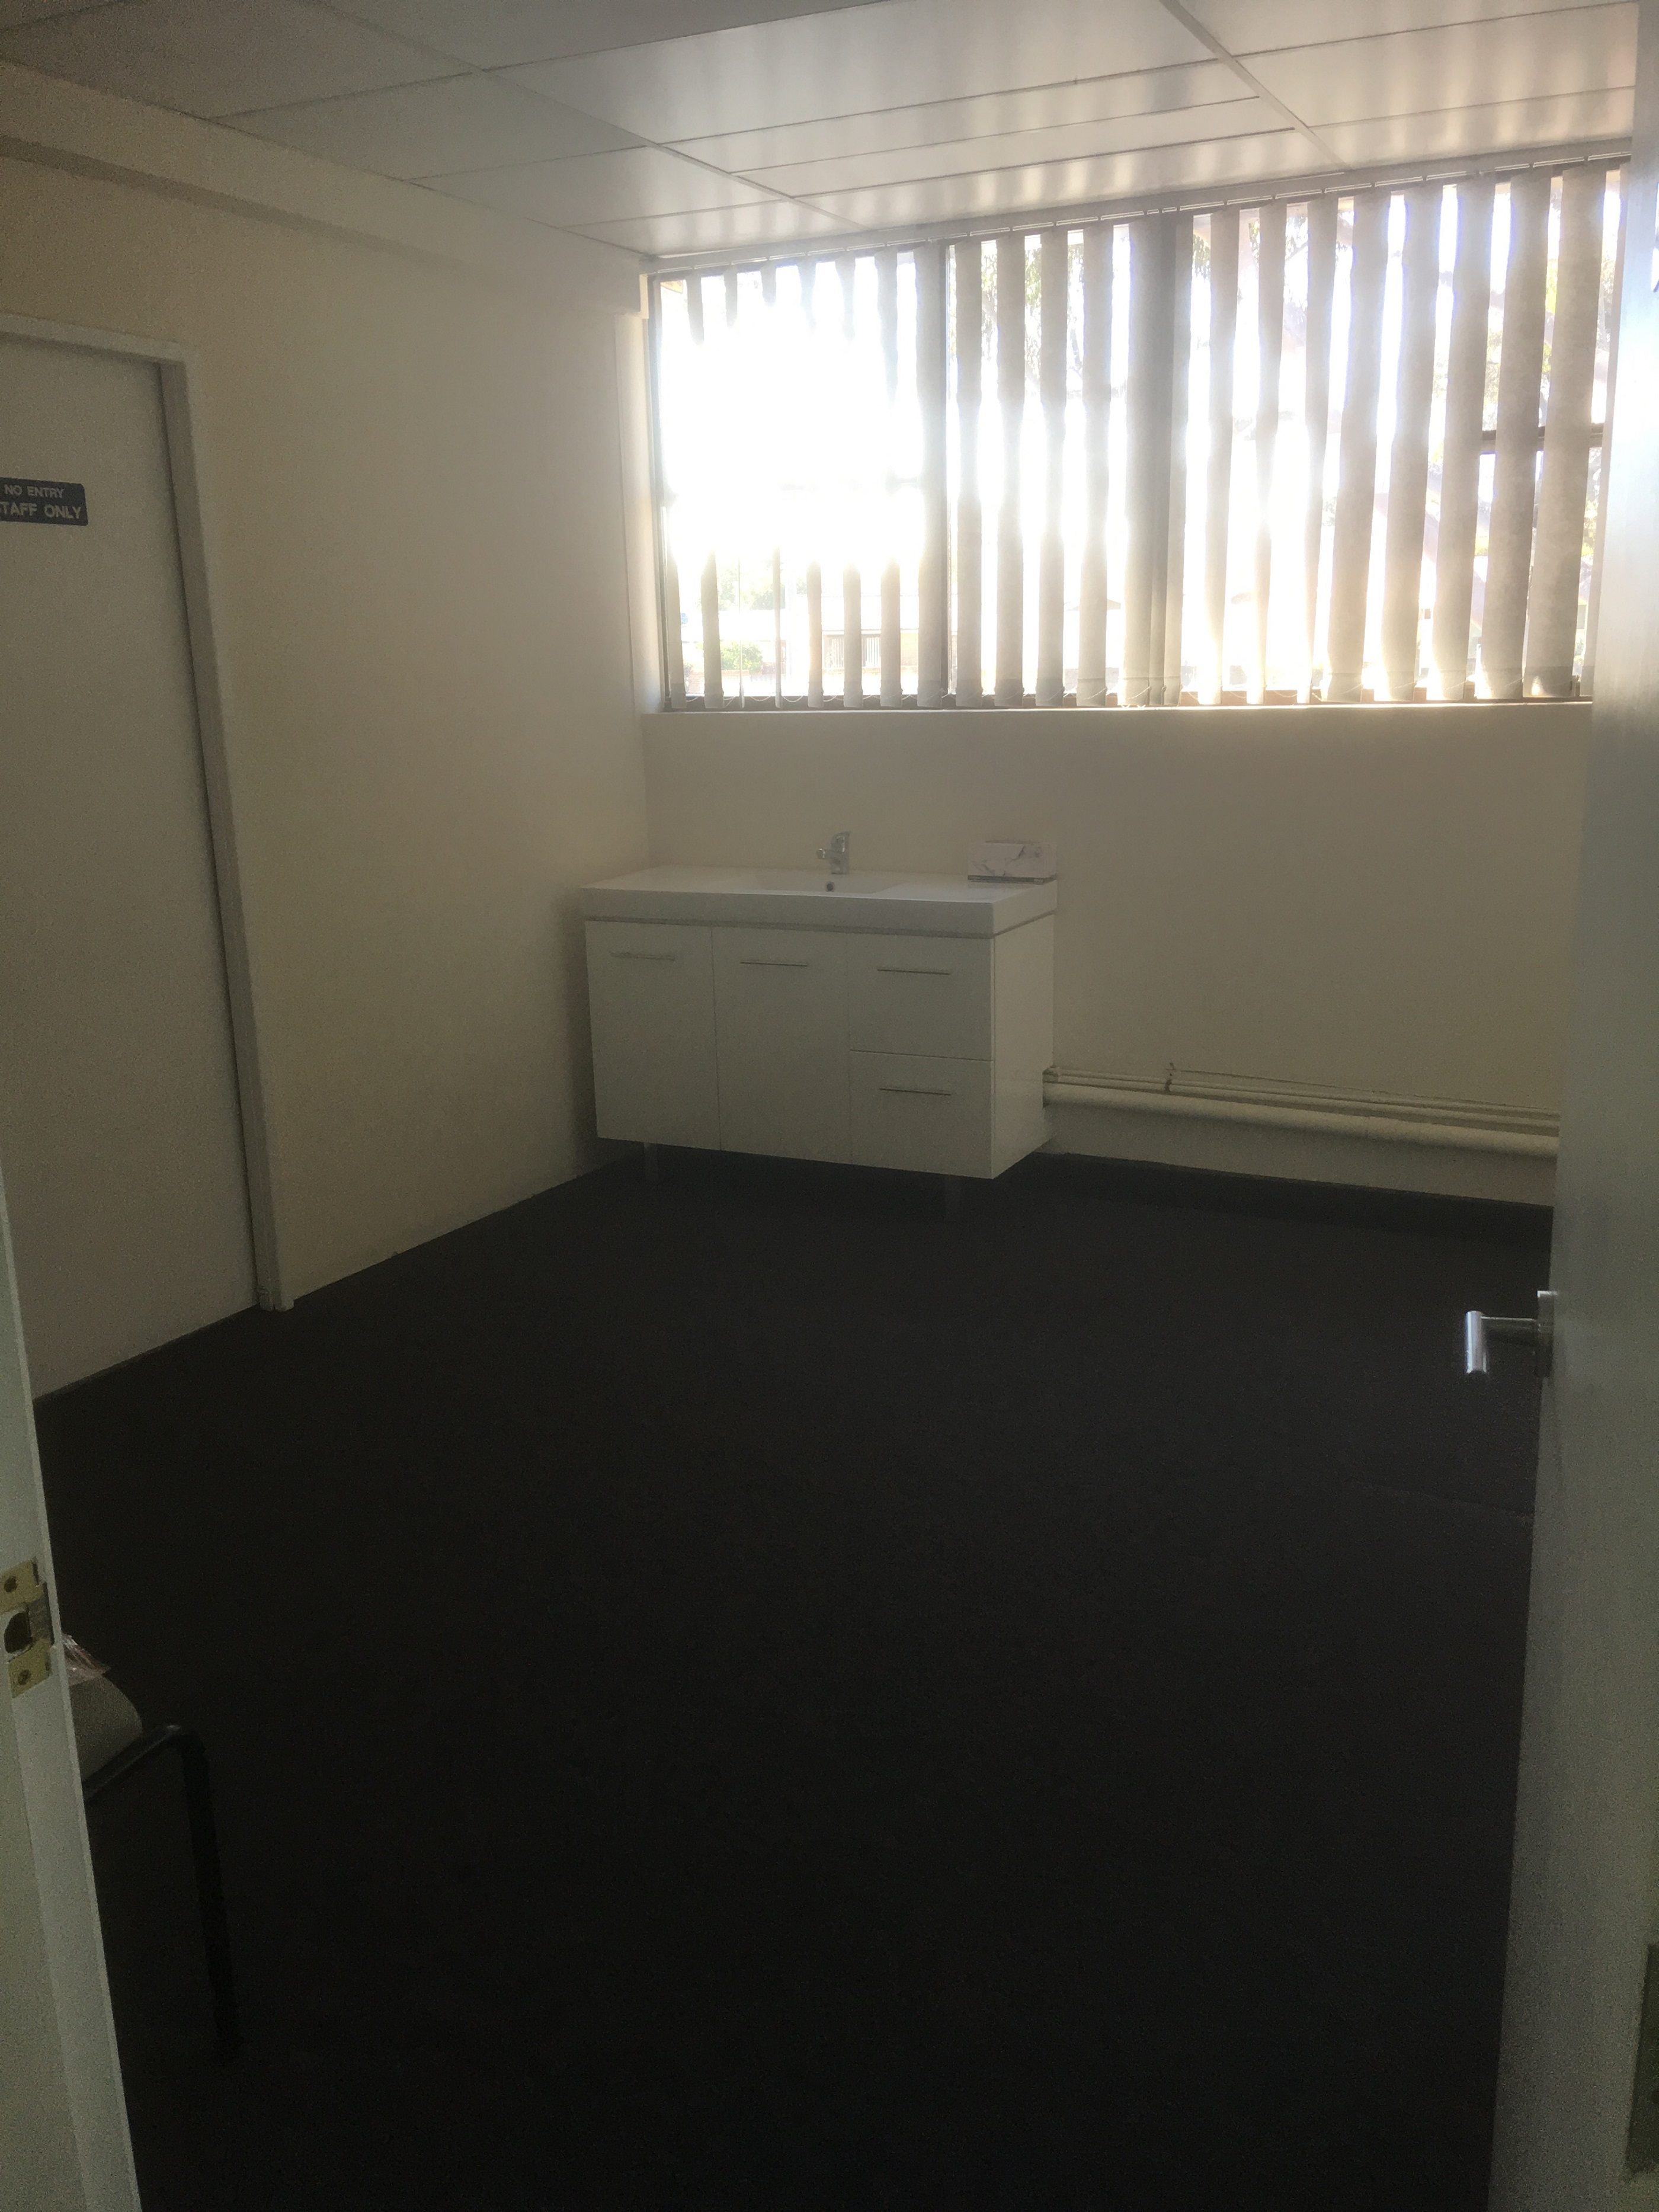 Commercial property for lease in kings langley 4